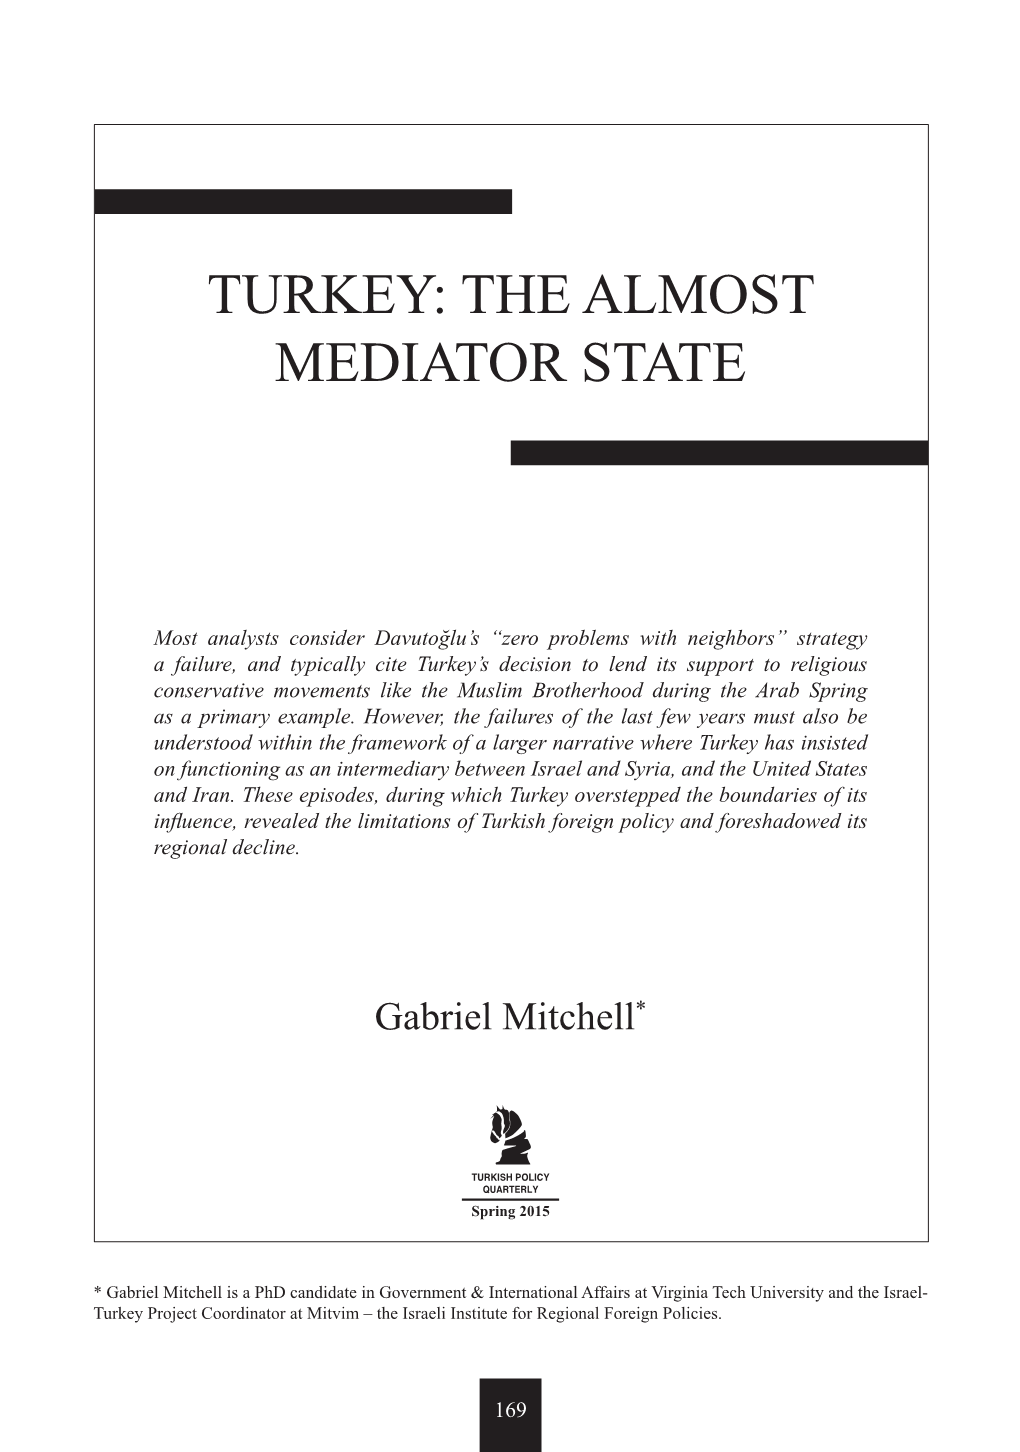 Turkey: the Almost Mediator State